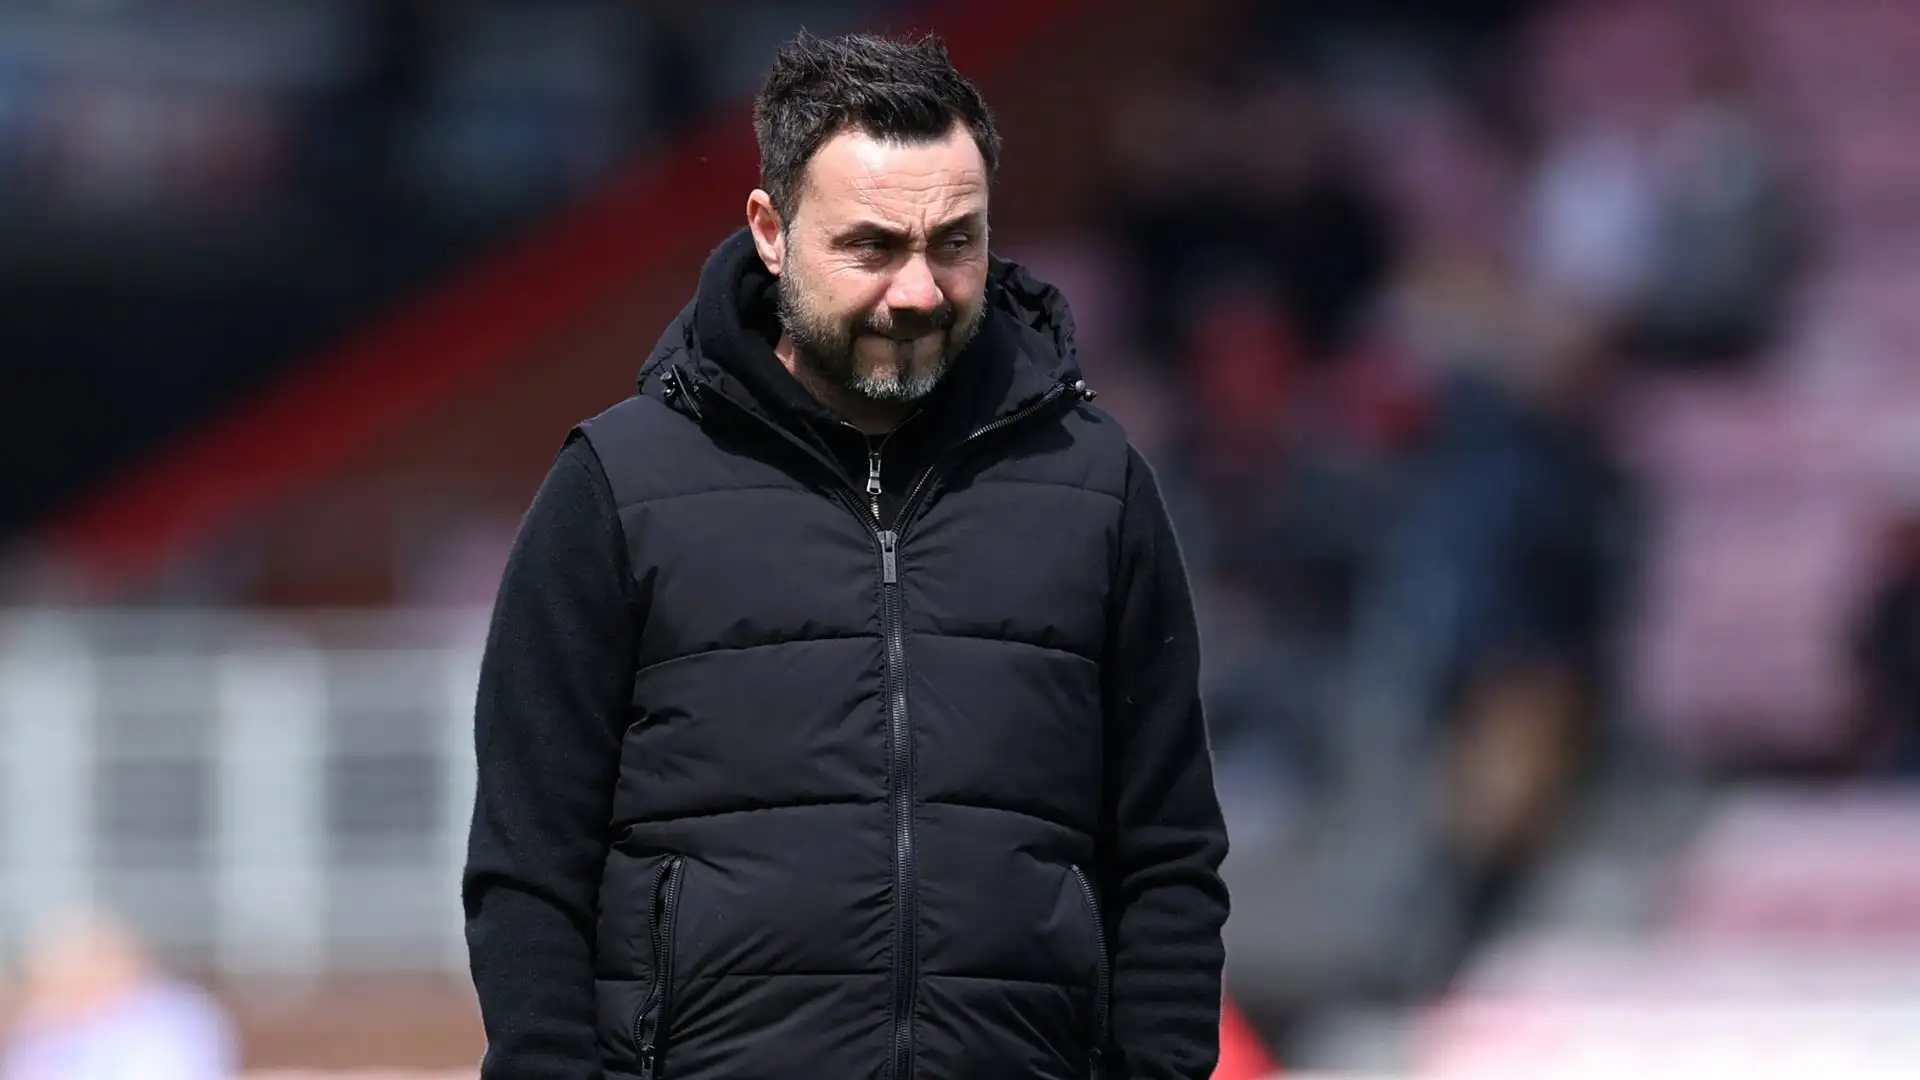 ‘What have you won?!’ – Roberto De Zerbi labelled a ‘third tier’ coach as Fabio Capello says Brighton boss is only highly rated because of Pep Guardiola